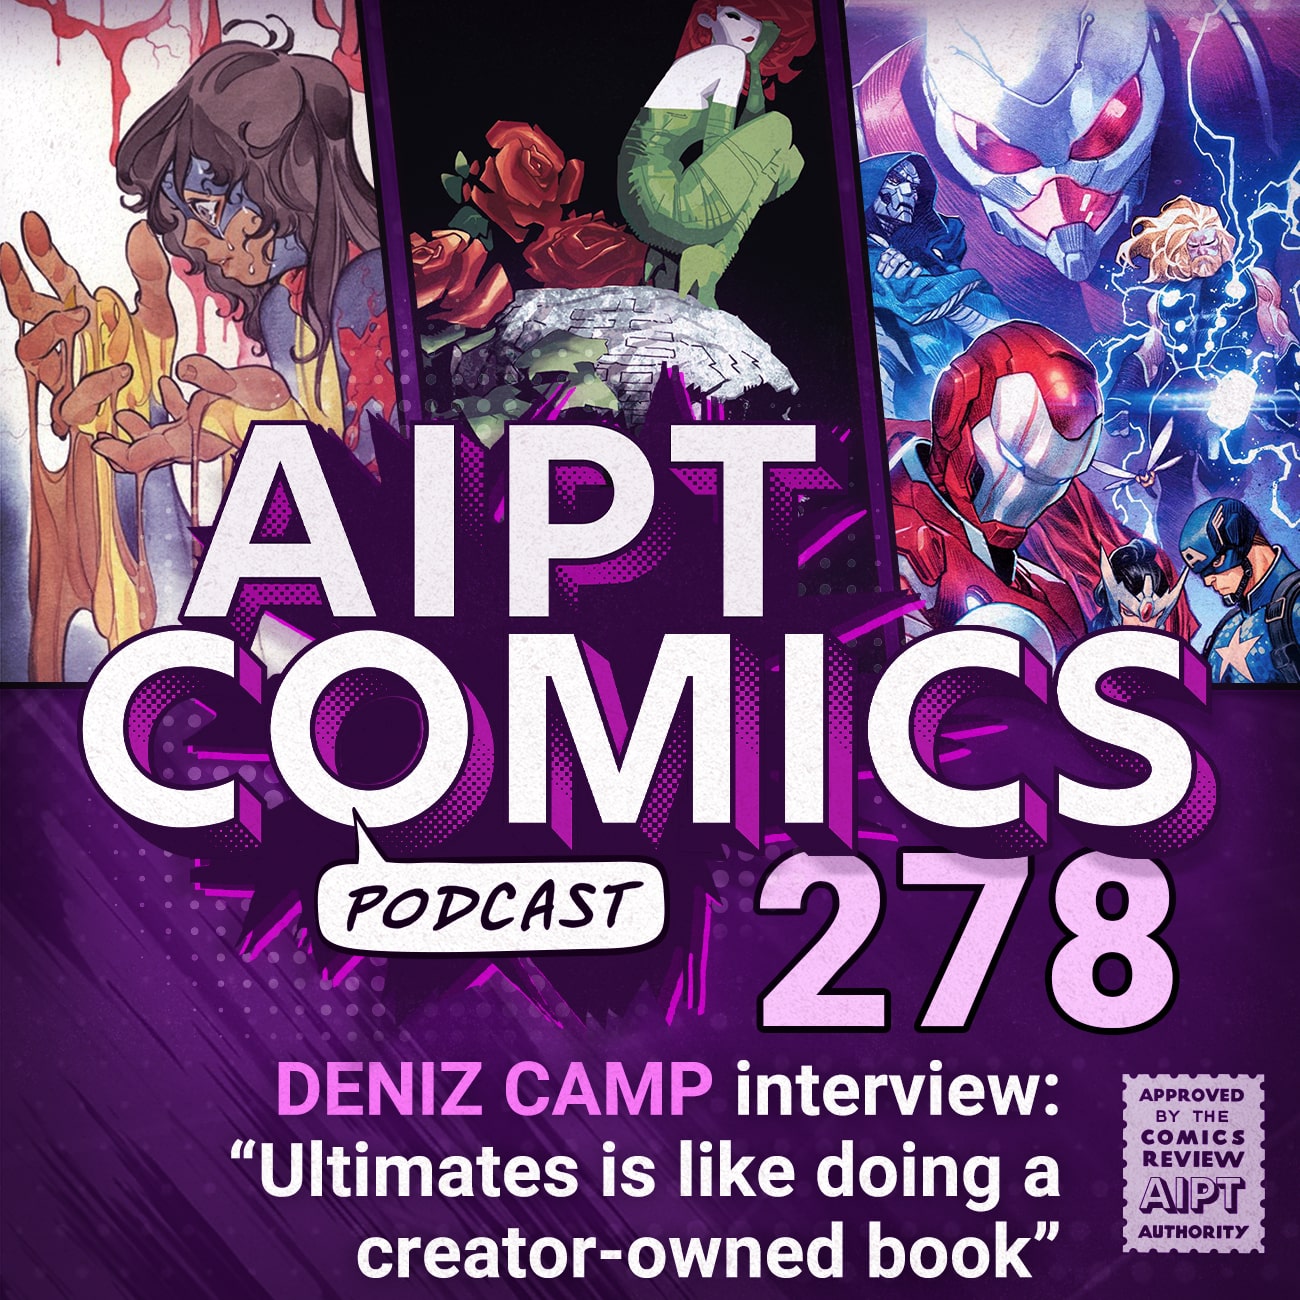 AIPT Comics Podcast Episode 278: Deniz Camp interview: “Ultimates is like doing a creator-owned book”